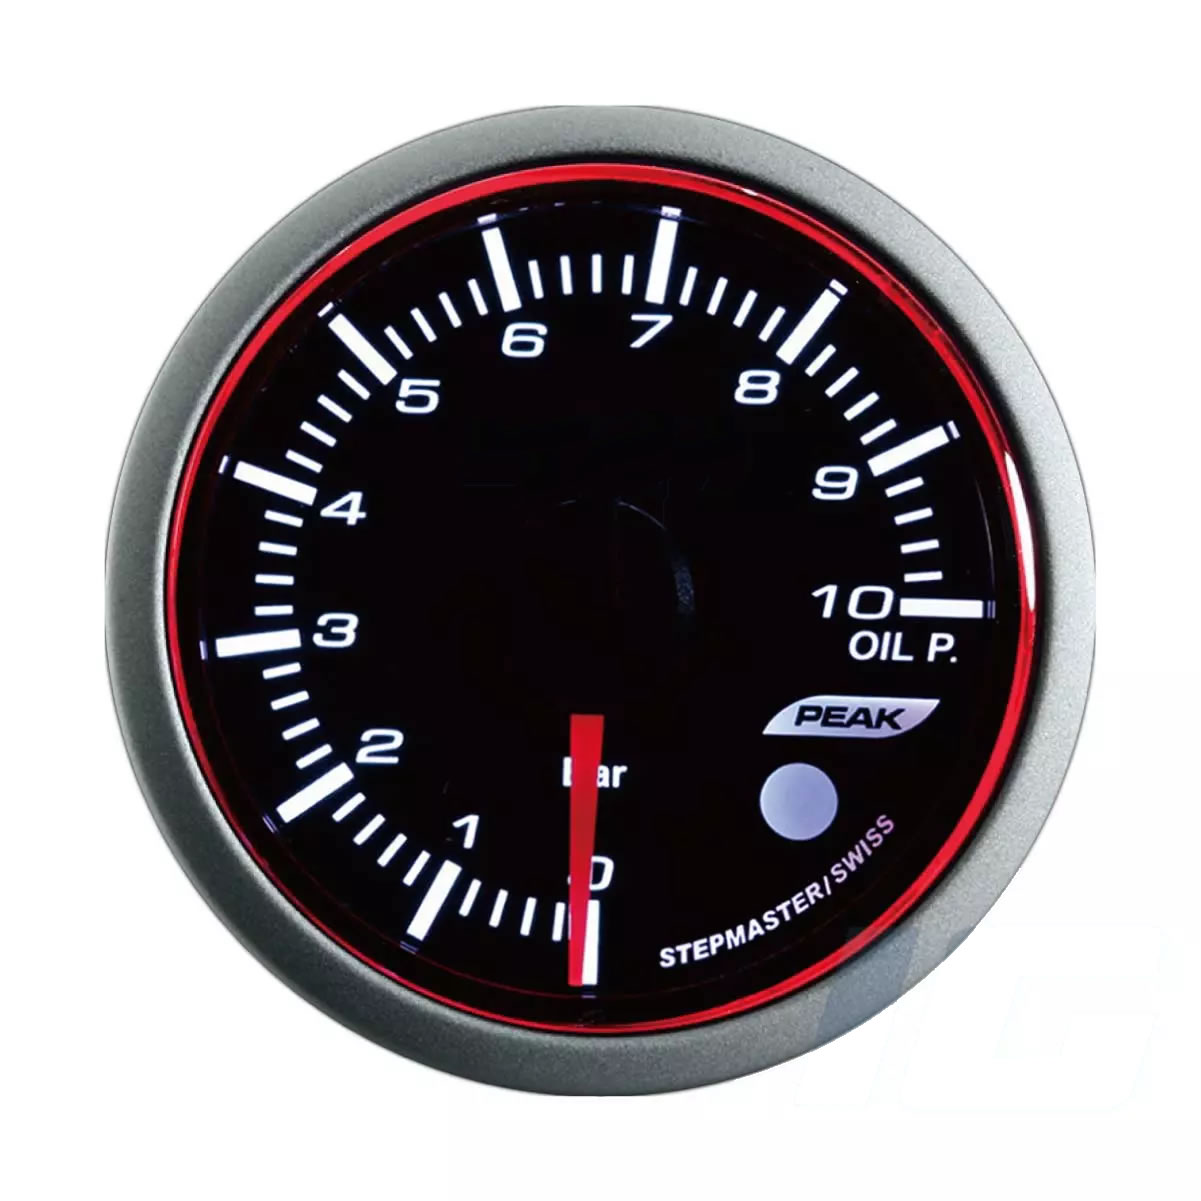 60mm White and Blue and Amber LED Performance Car Gauges - Oil Pressure Gauge With Sensor and Warning and Peak For Your Sport Racing Car